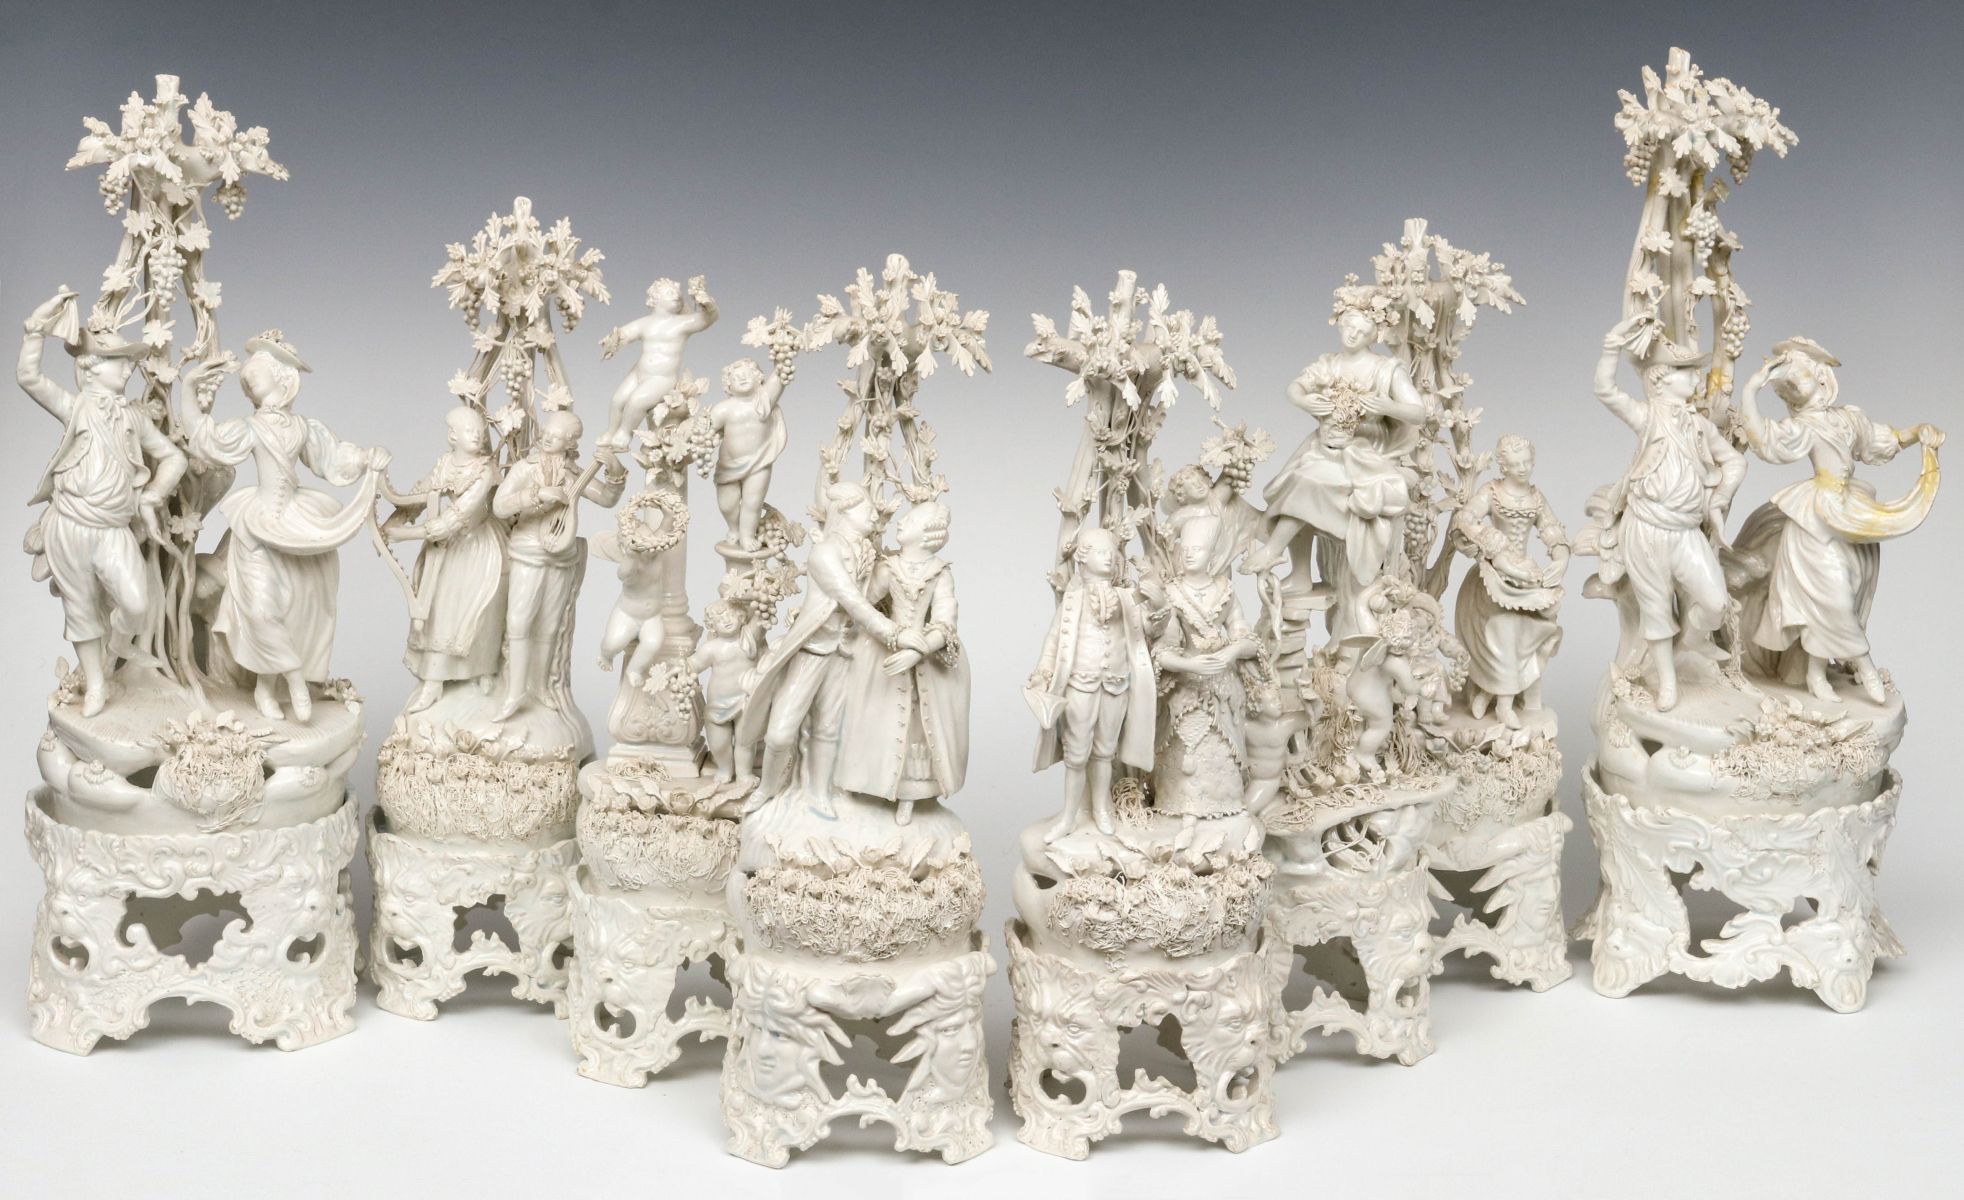 A SUITE OF EIGHT DETAILED 19C CAPO DI MONTE GROUPINGS